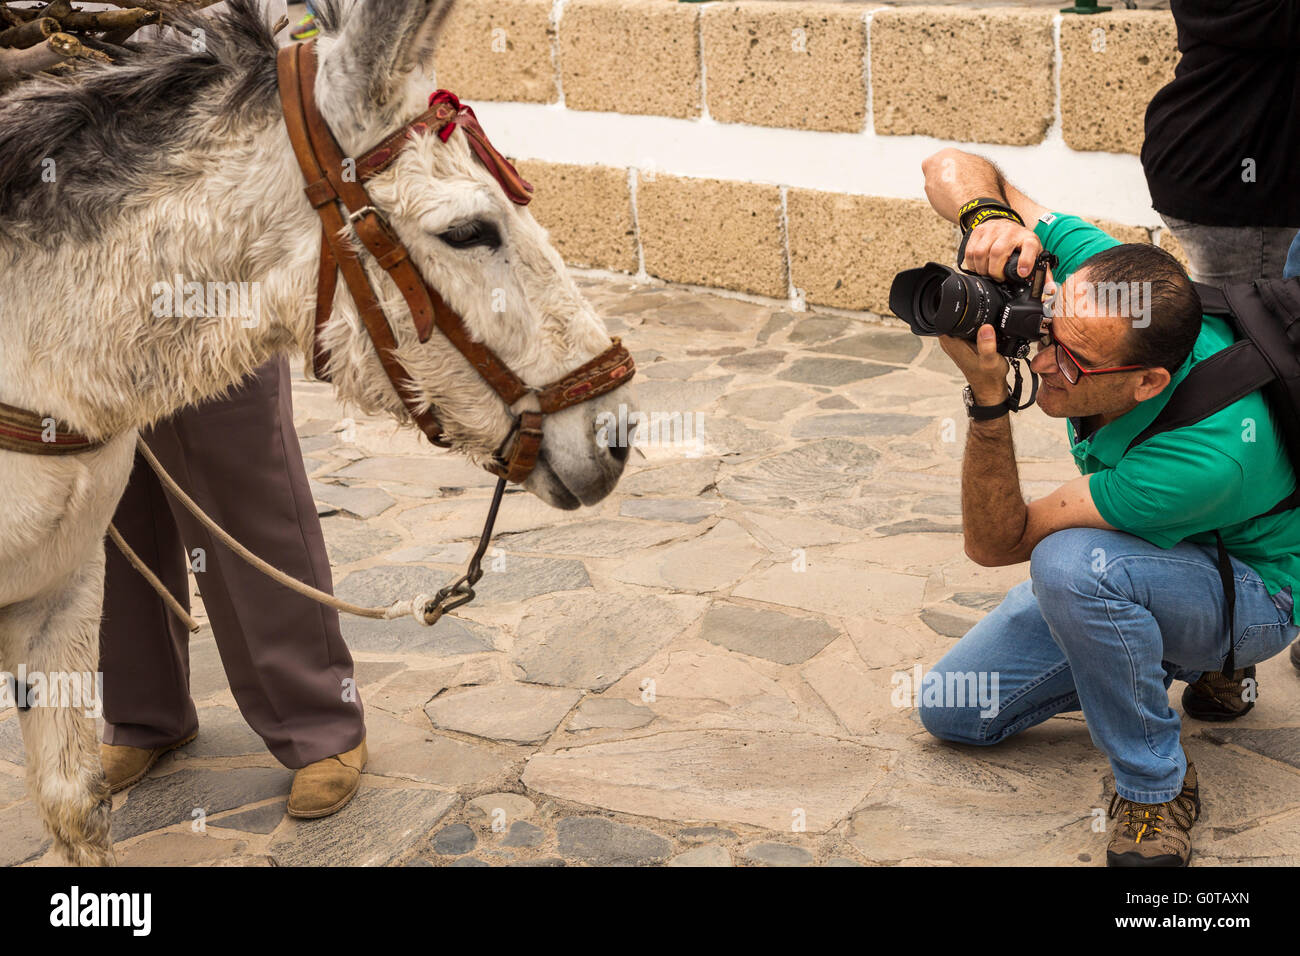 Photographer with Nikon camera and Sigma lens photographing a donkey, Adeje, Tenerife, Canary Islands, Spain. Stock Photo